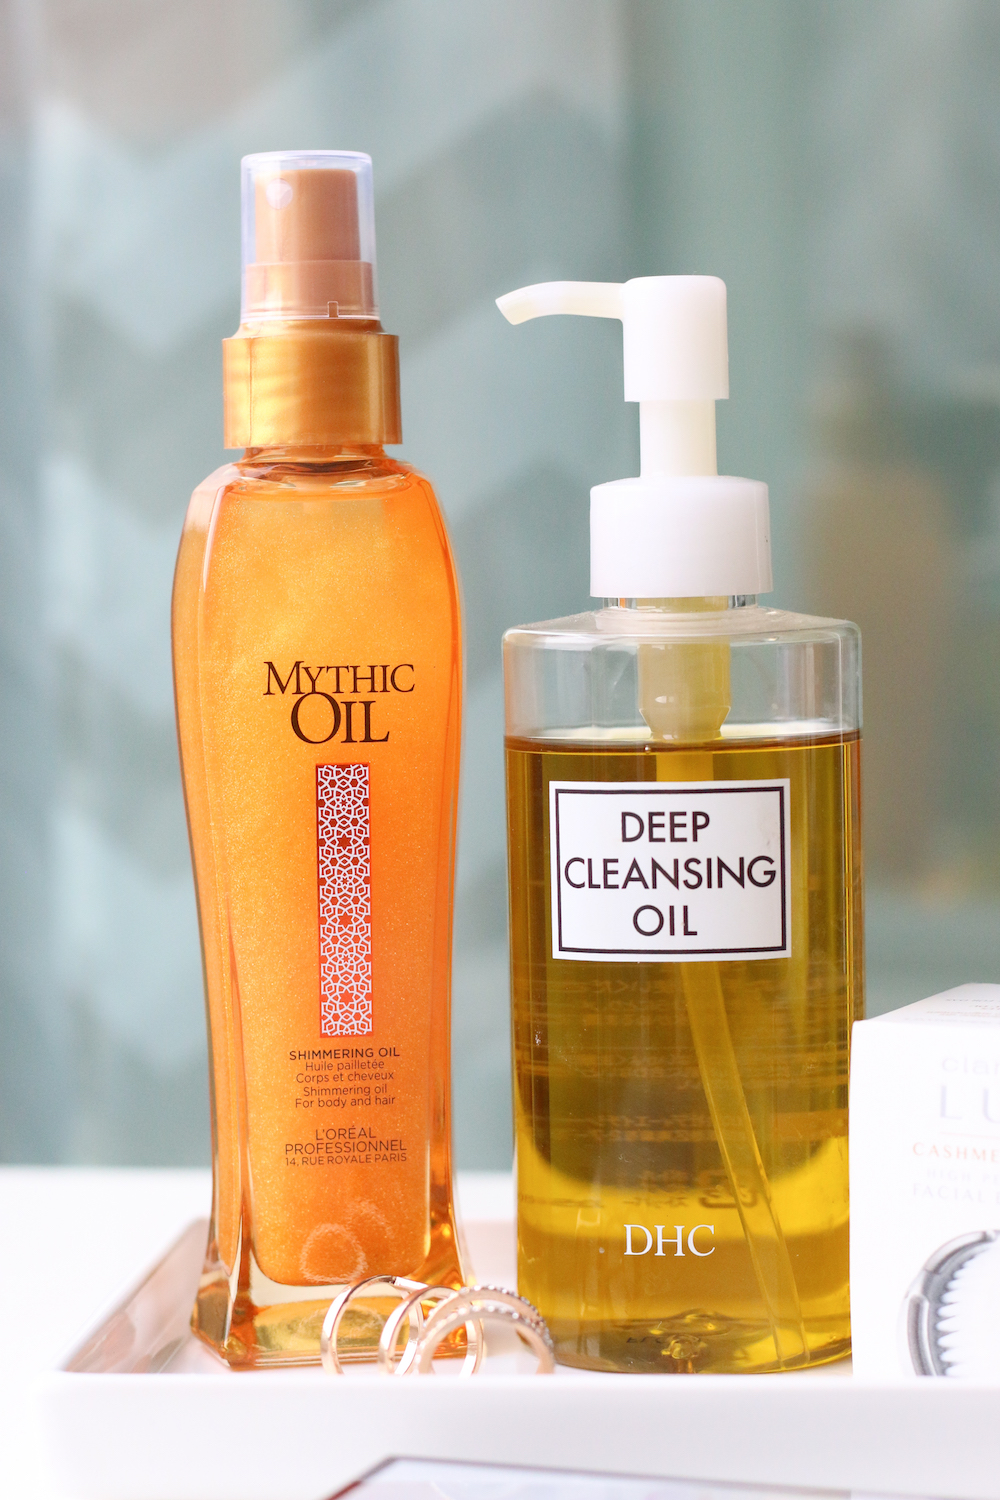 mythic-oil-loreal-deep-cleansing-oil-dhc